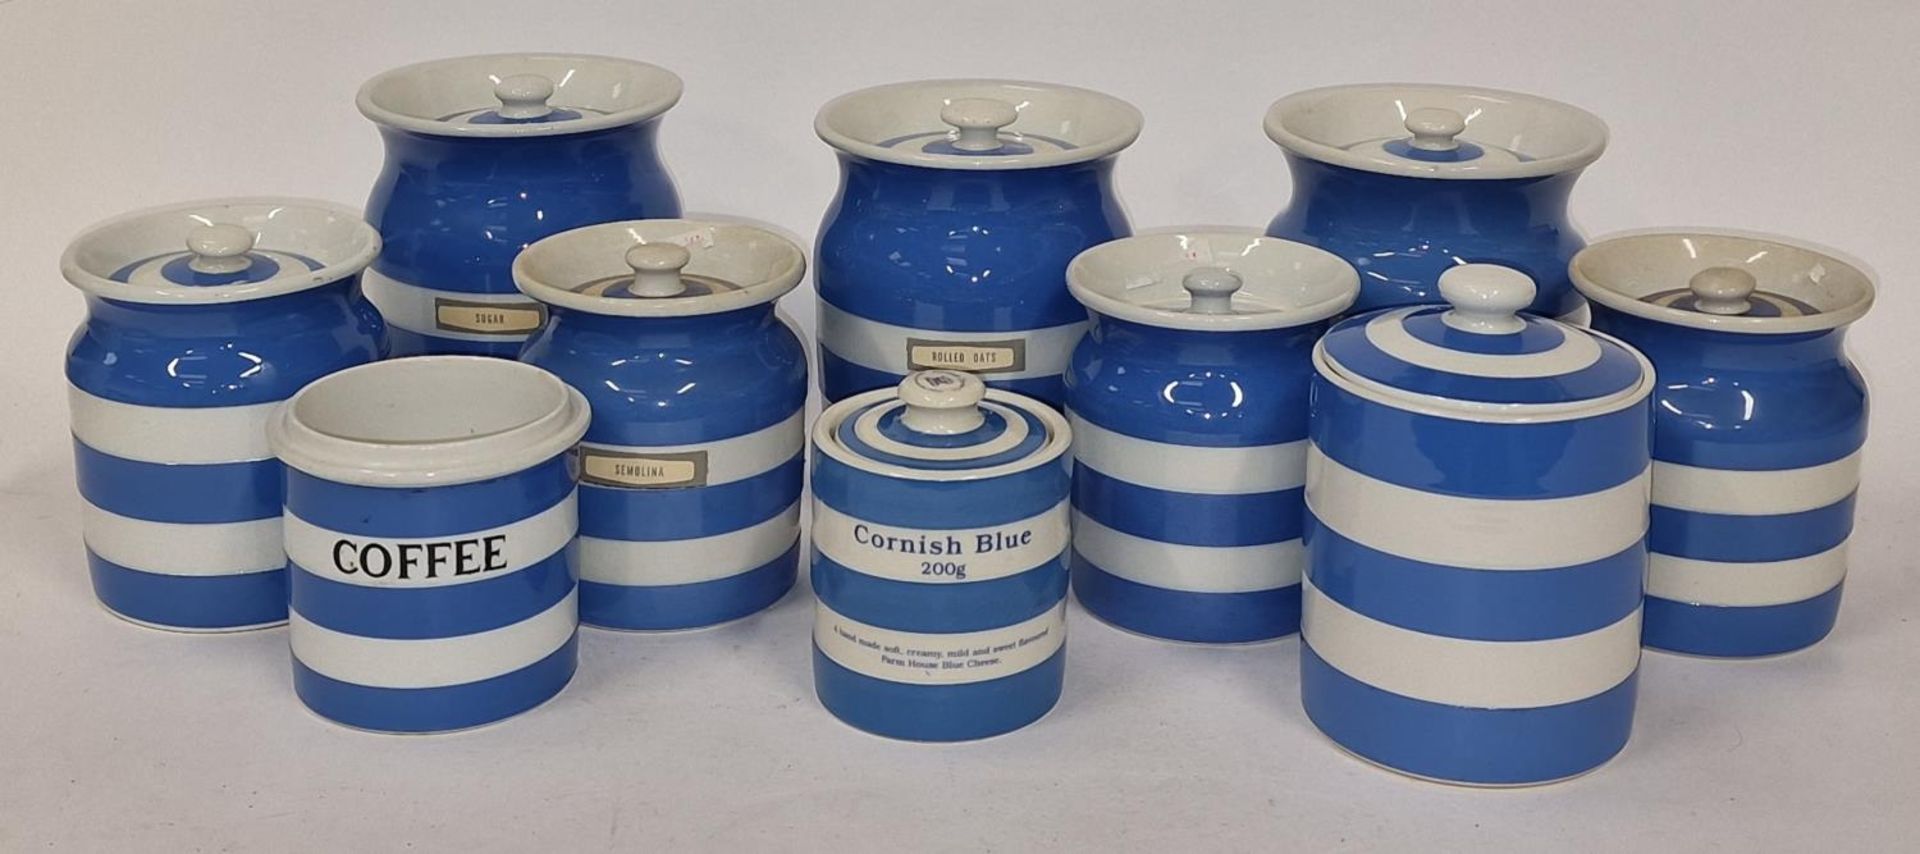 T.G Green & Co. collection of blue and white Cornish Ware kitchen storage jars of different sizes (